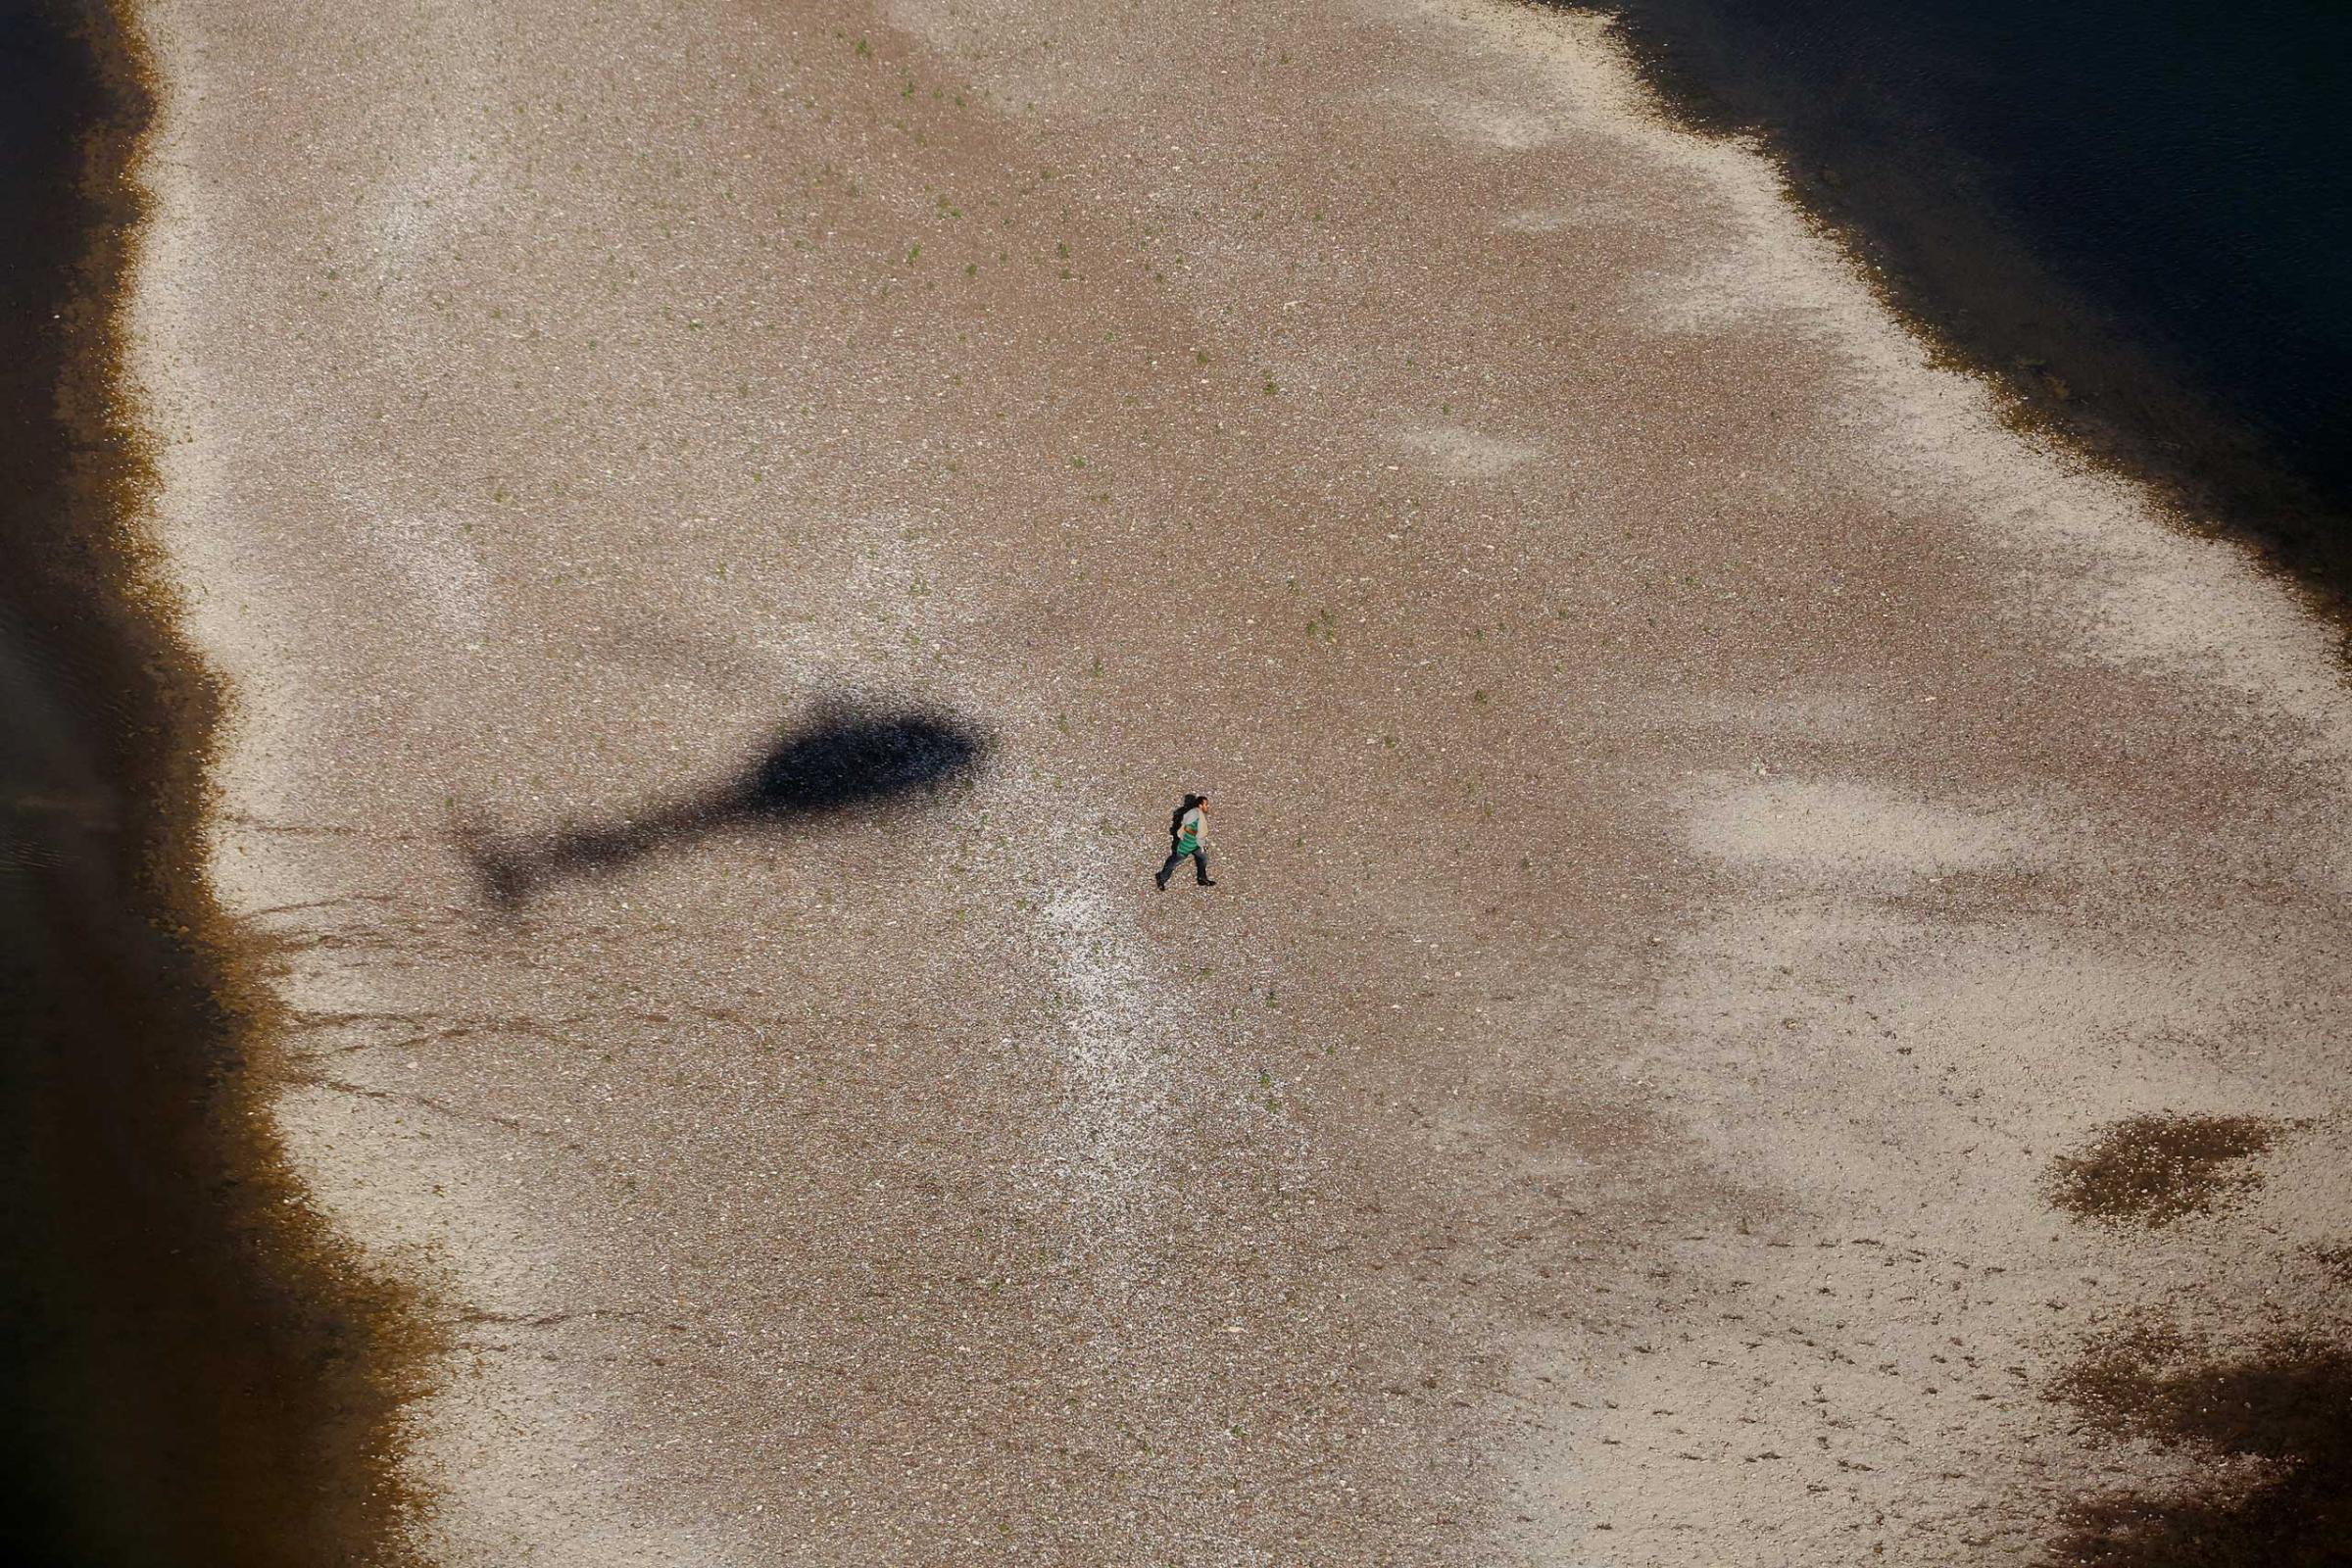 A suspected migrant runs back to Miguel Aleman, Mexico after being pursued by agents near Roma, Texas, Oct. 8, 2014.